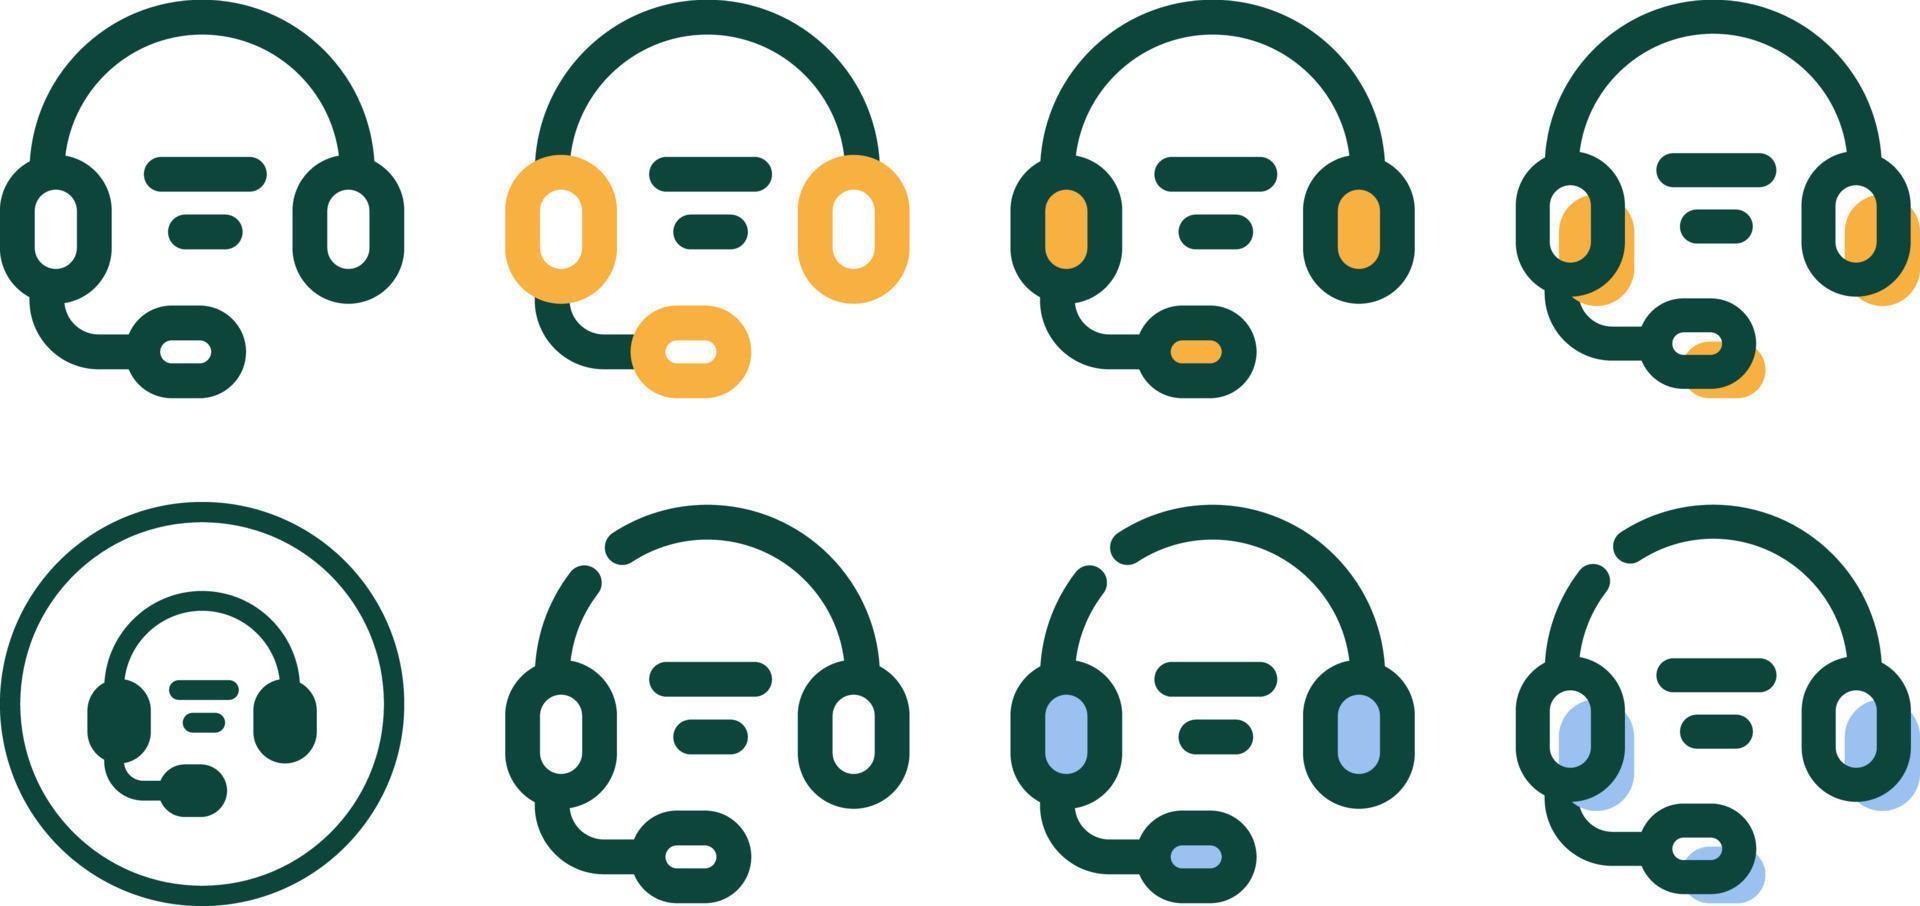 customer care service help and support center icon set vector